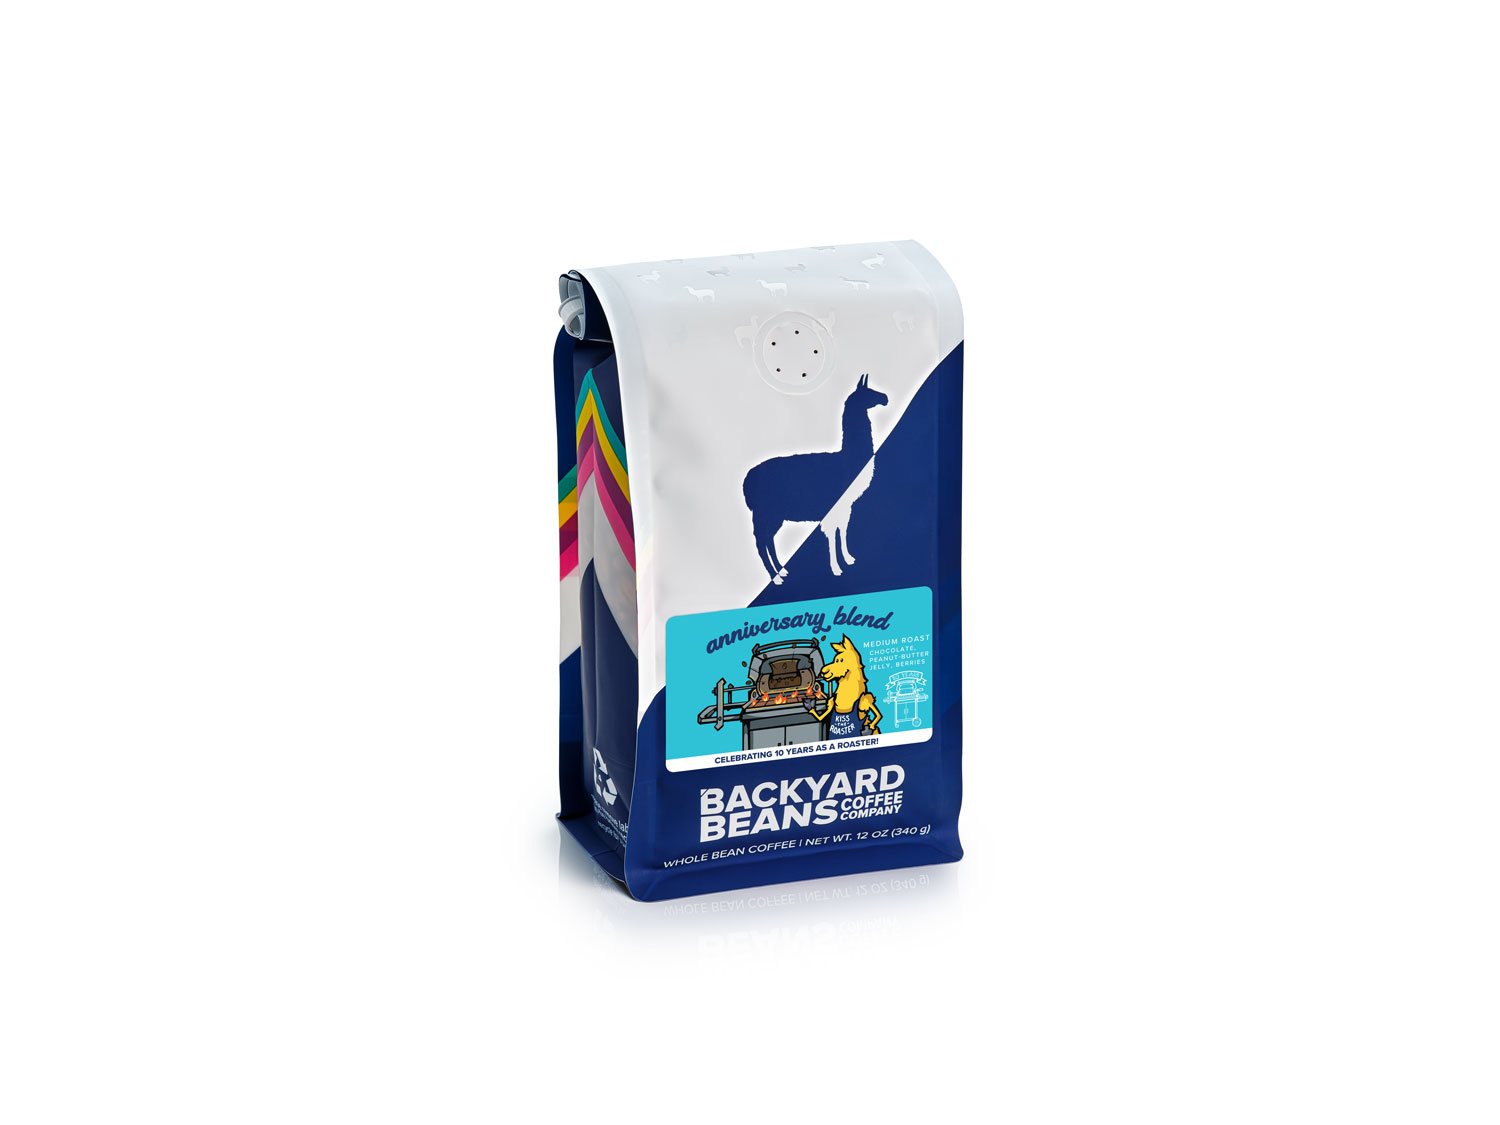 Image of Anniversary Blend coffee bag.